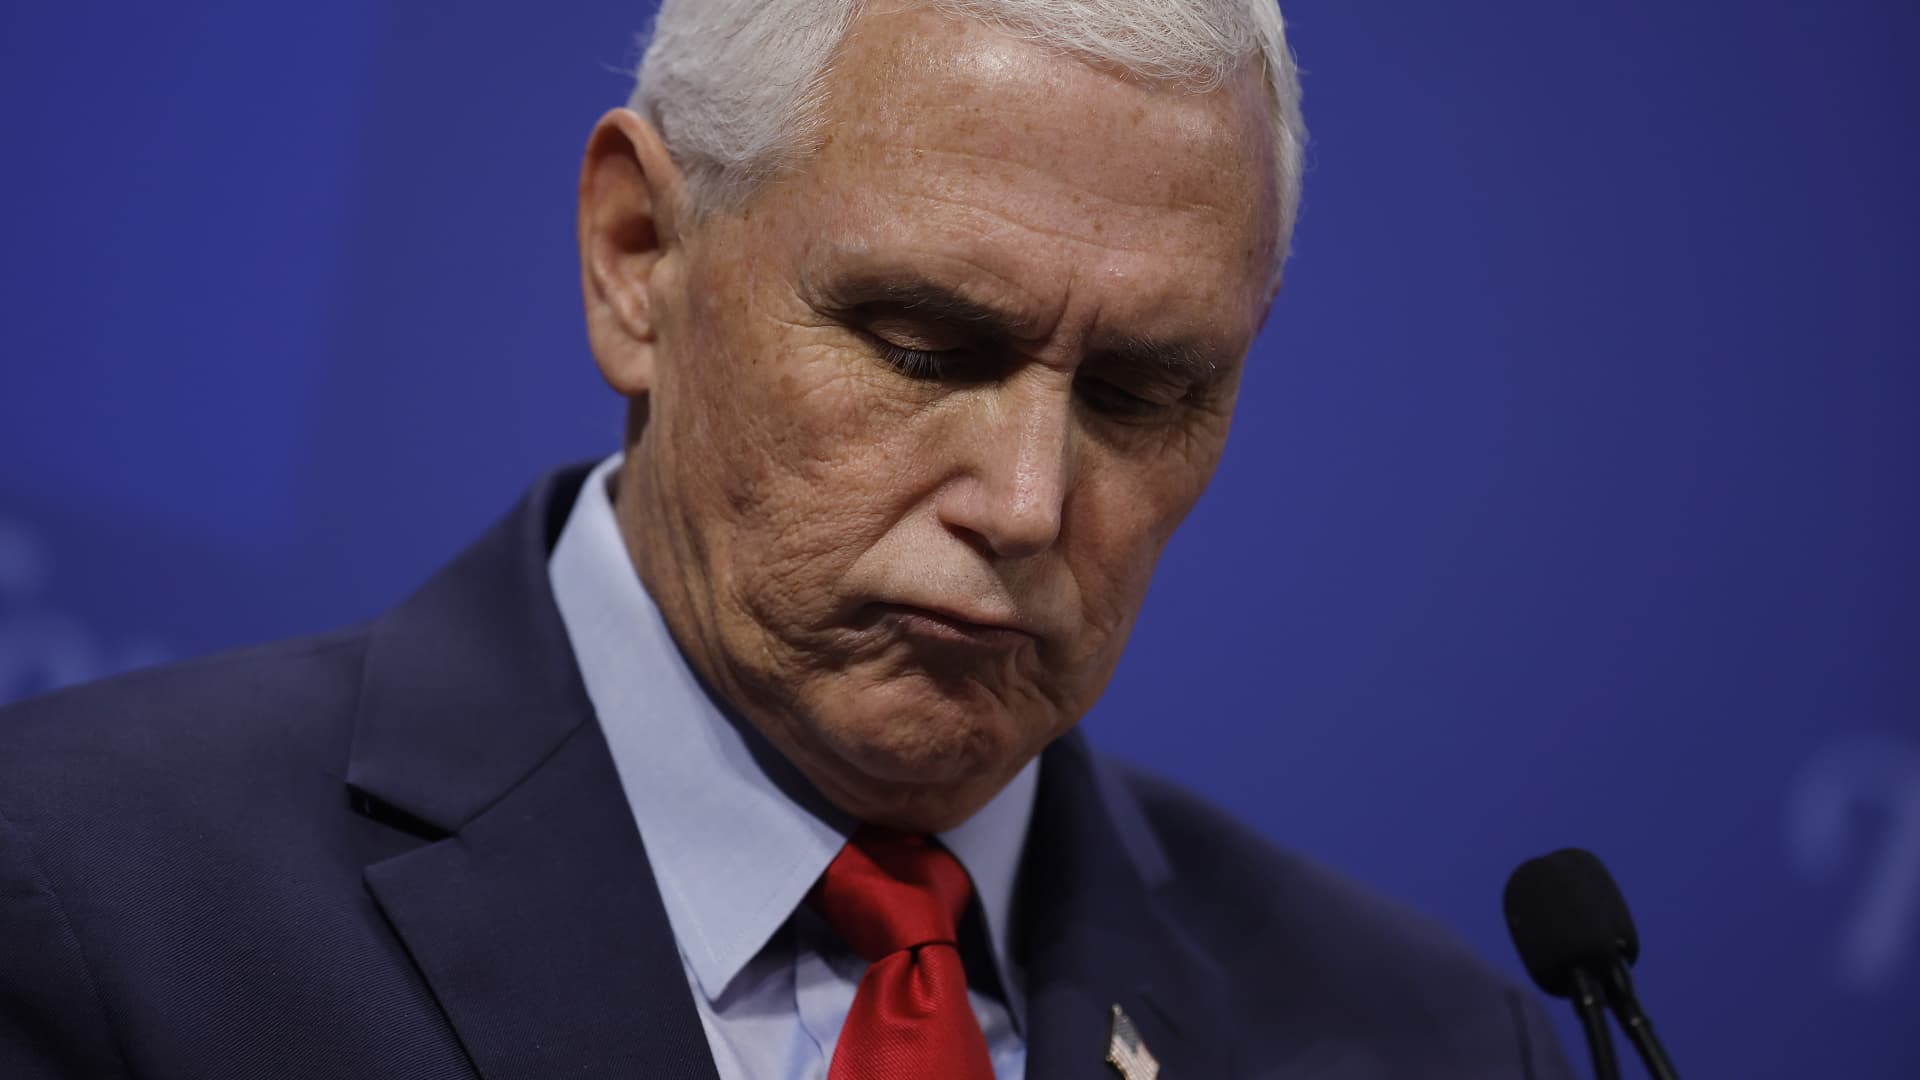 Classified documents found at Mike Pence home